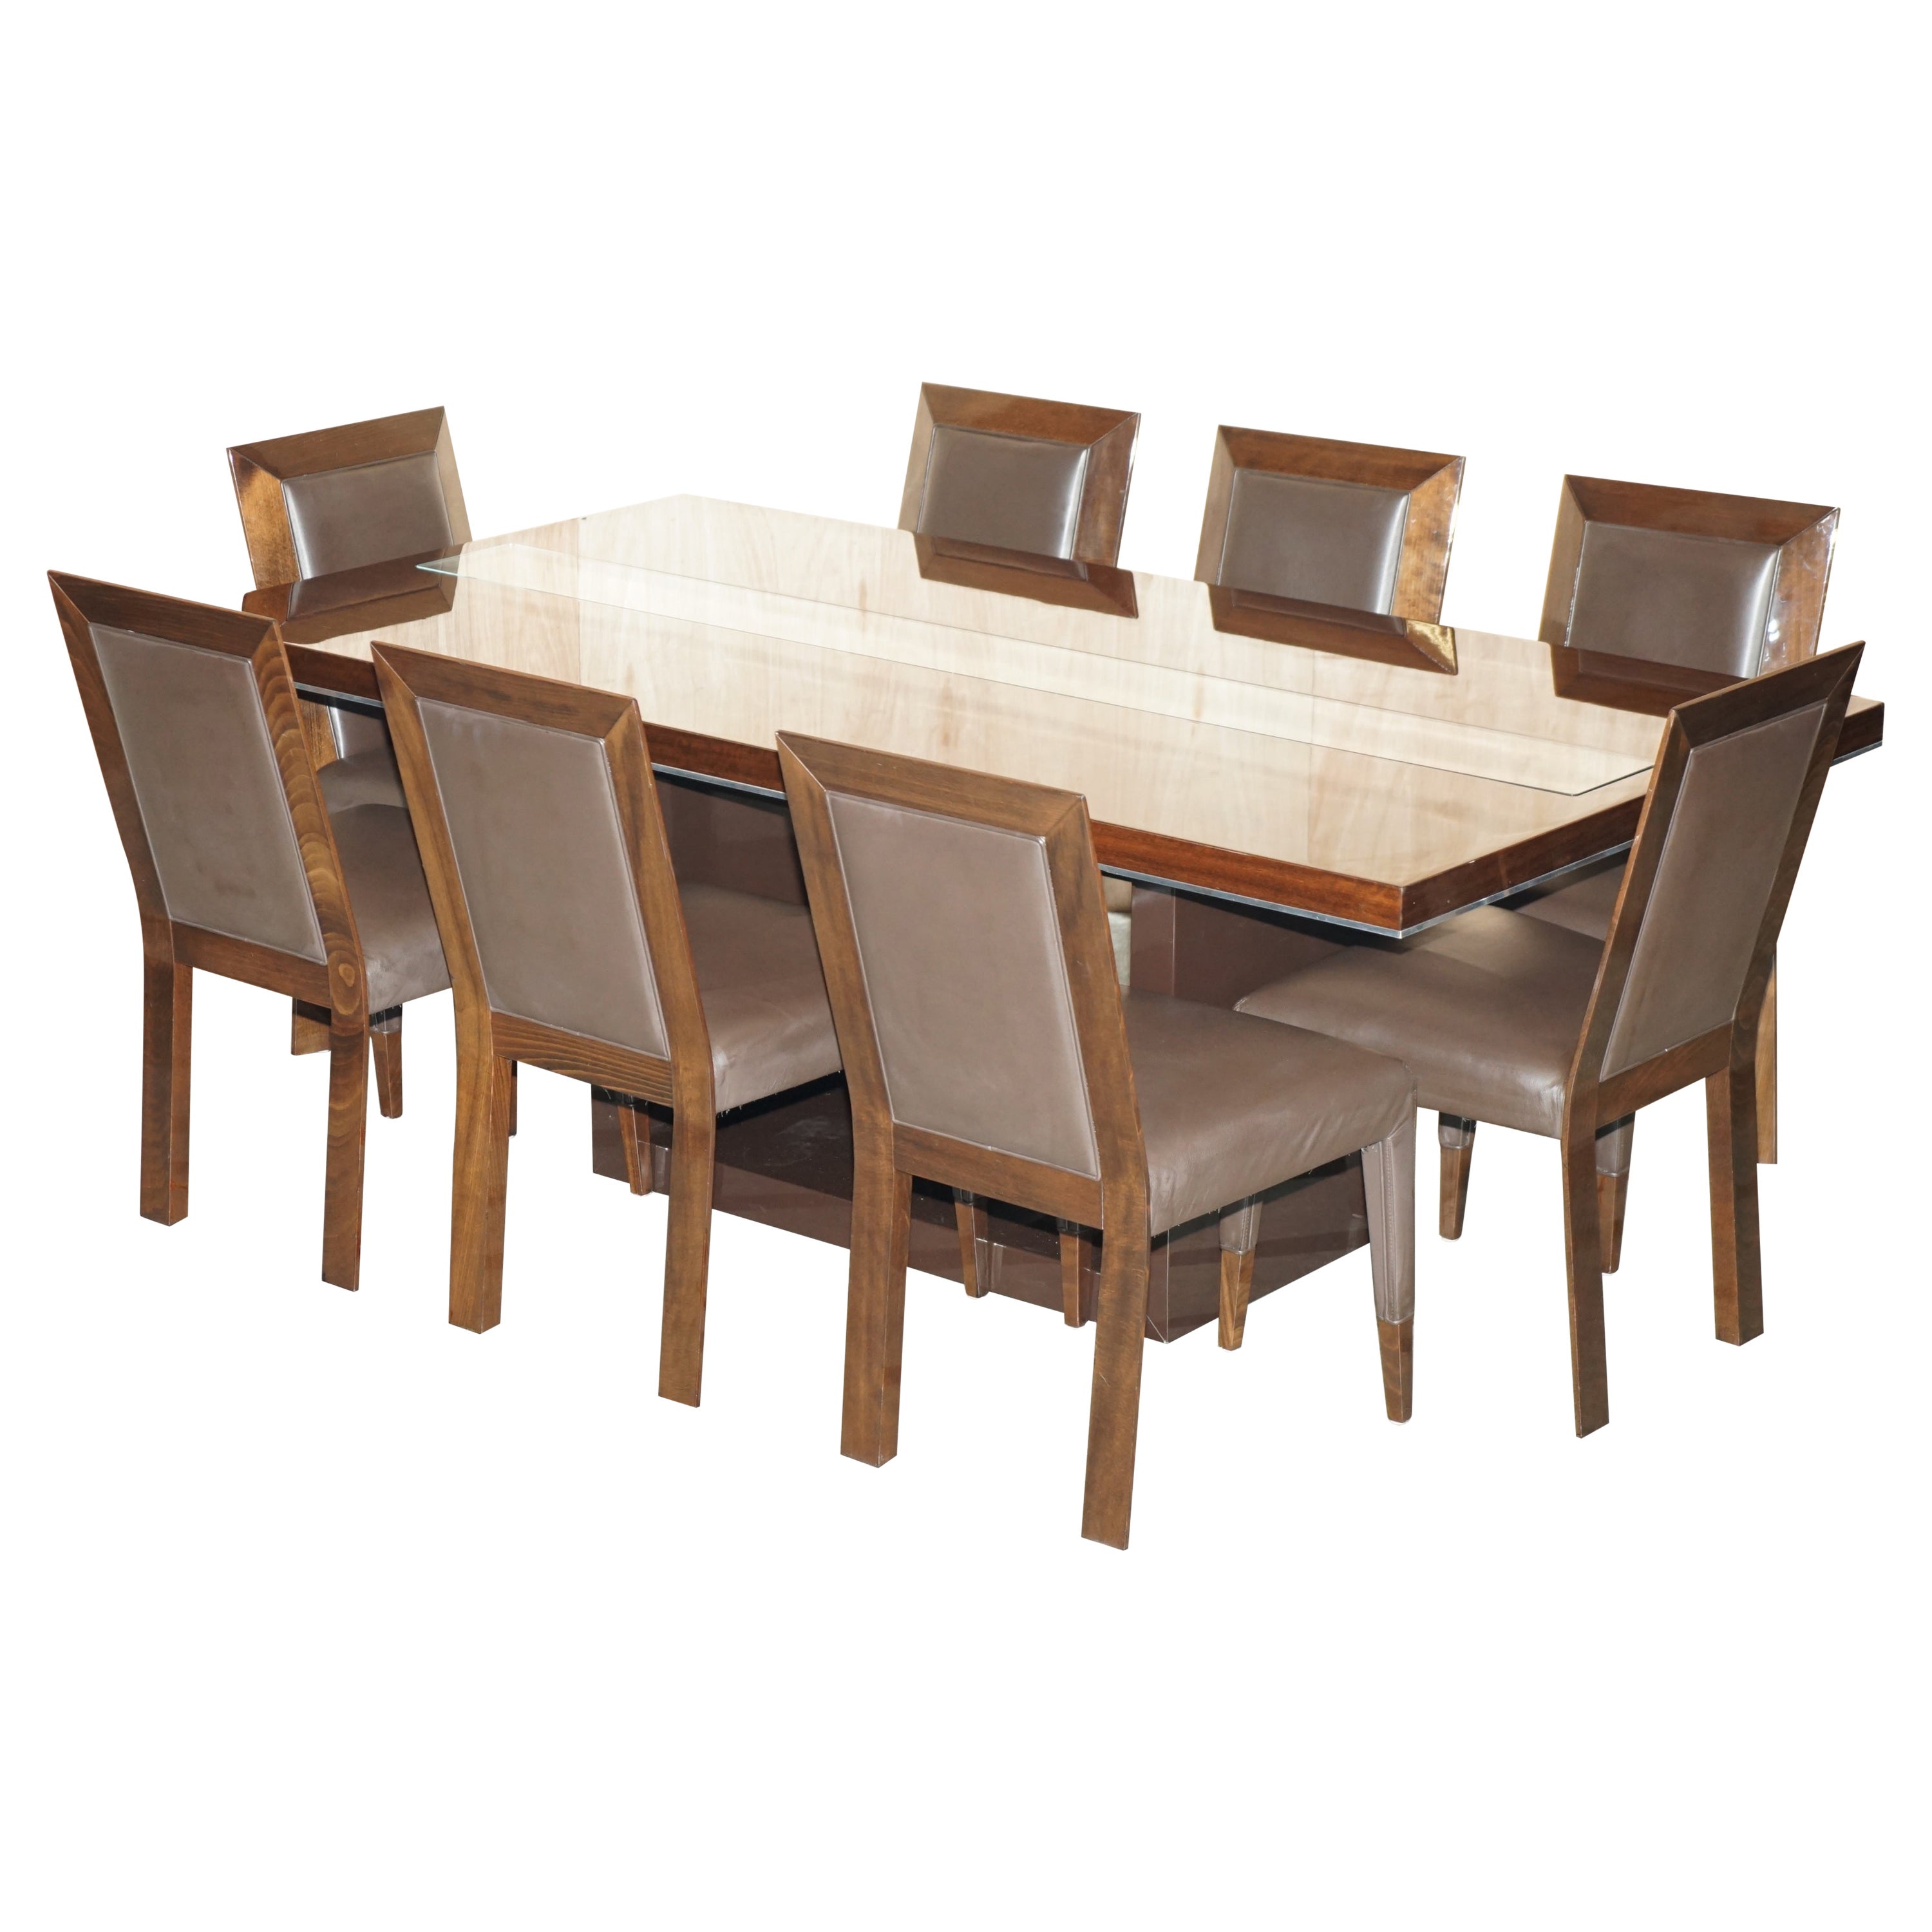 DESIGNER KESTERPORT AMERICAN HARDWOOD DiNING TABLE & CHAIR DINING ROOM SUITE For Sale